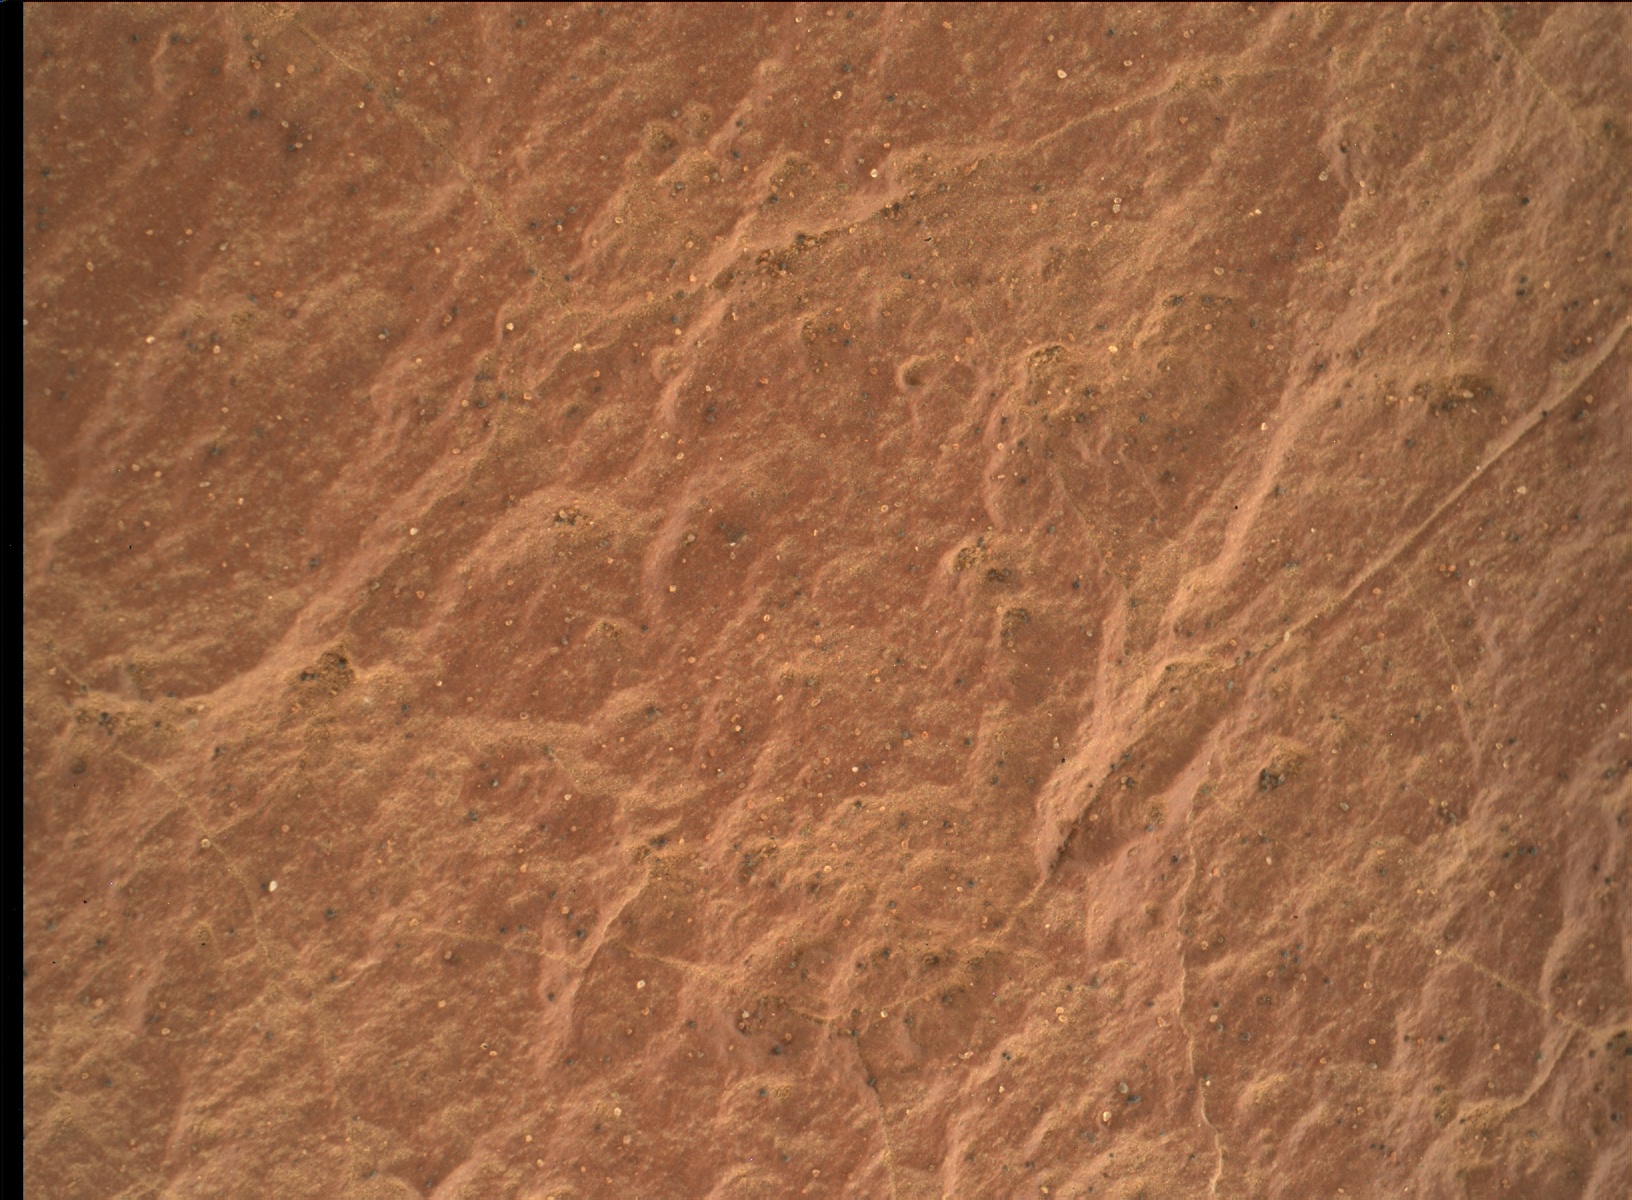 Nasa's Mars rover Curiosity acquired this image using its Mars Hand Lens Imager (MAHLI) on Sol 1584